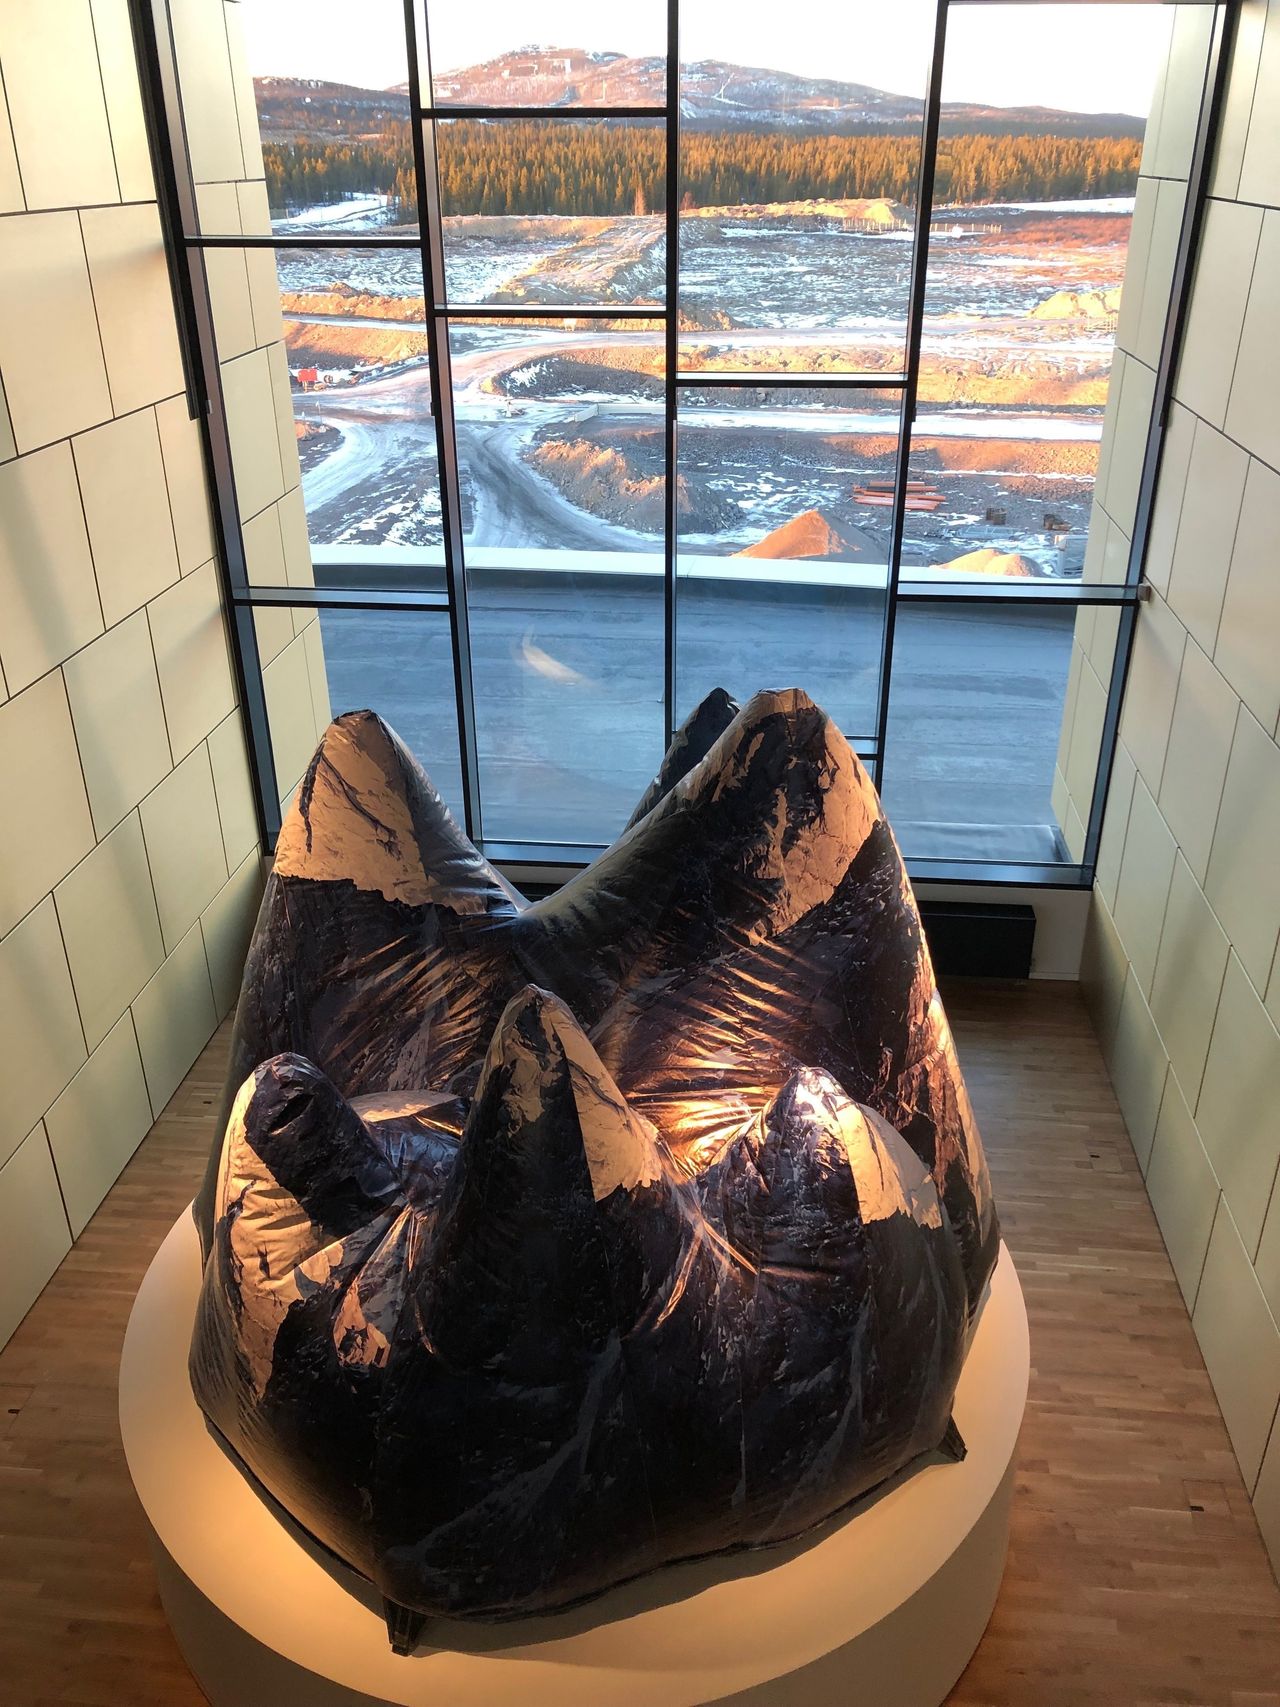 An artwork by Sami artist Carola Grahn in the new City Hall. While she admits it’s complicated, some Sami people work for the mine. She believes her people have been colonized and ignored thanks to the ore.